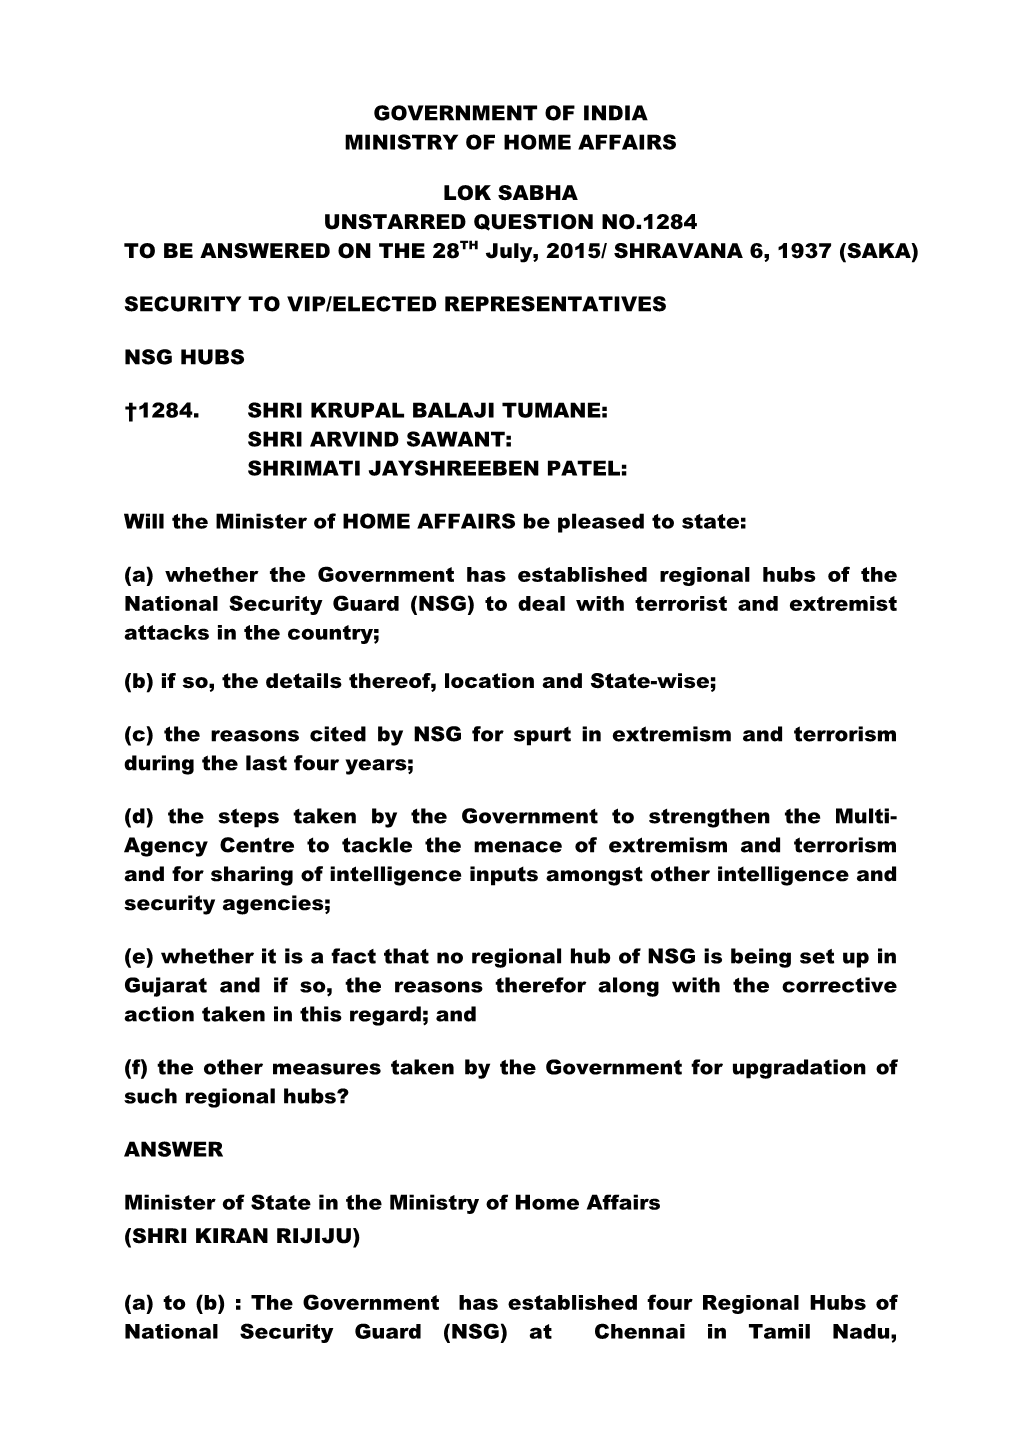 GOVERNMENT of INDIA MINISTRY of HOME AFFAIRS LOK SABHA UNSTARRED QUESTION NO.1284 to BE ANSWERED on the 28TH July, 2015/ SHRAVAN